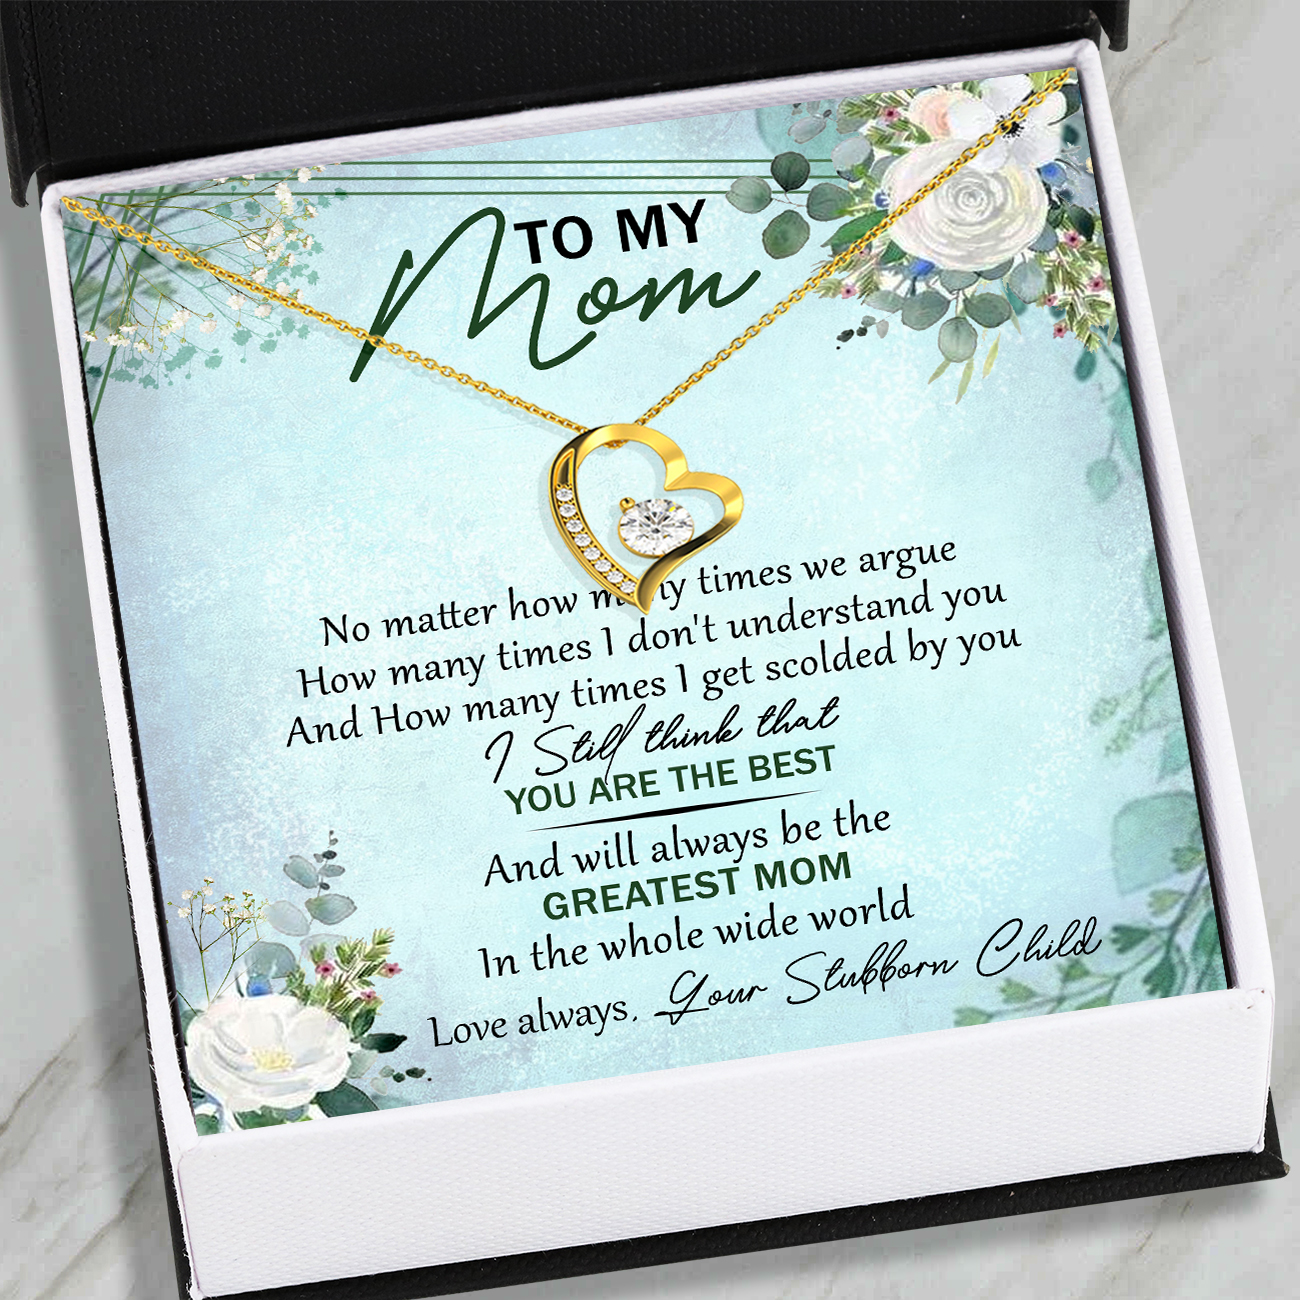 https://homewix.com/wp-content/uploads/2021/04/2021-04-To-My-Mom-Forever-Love-Necklace-BV54-mockup1-yellow.jpg